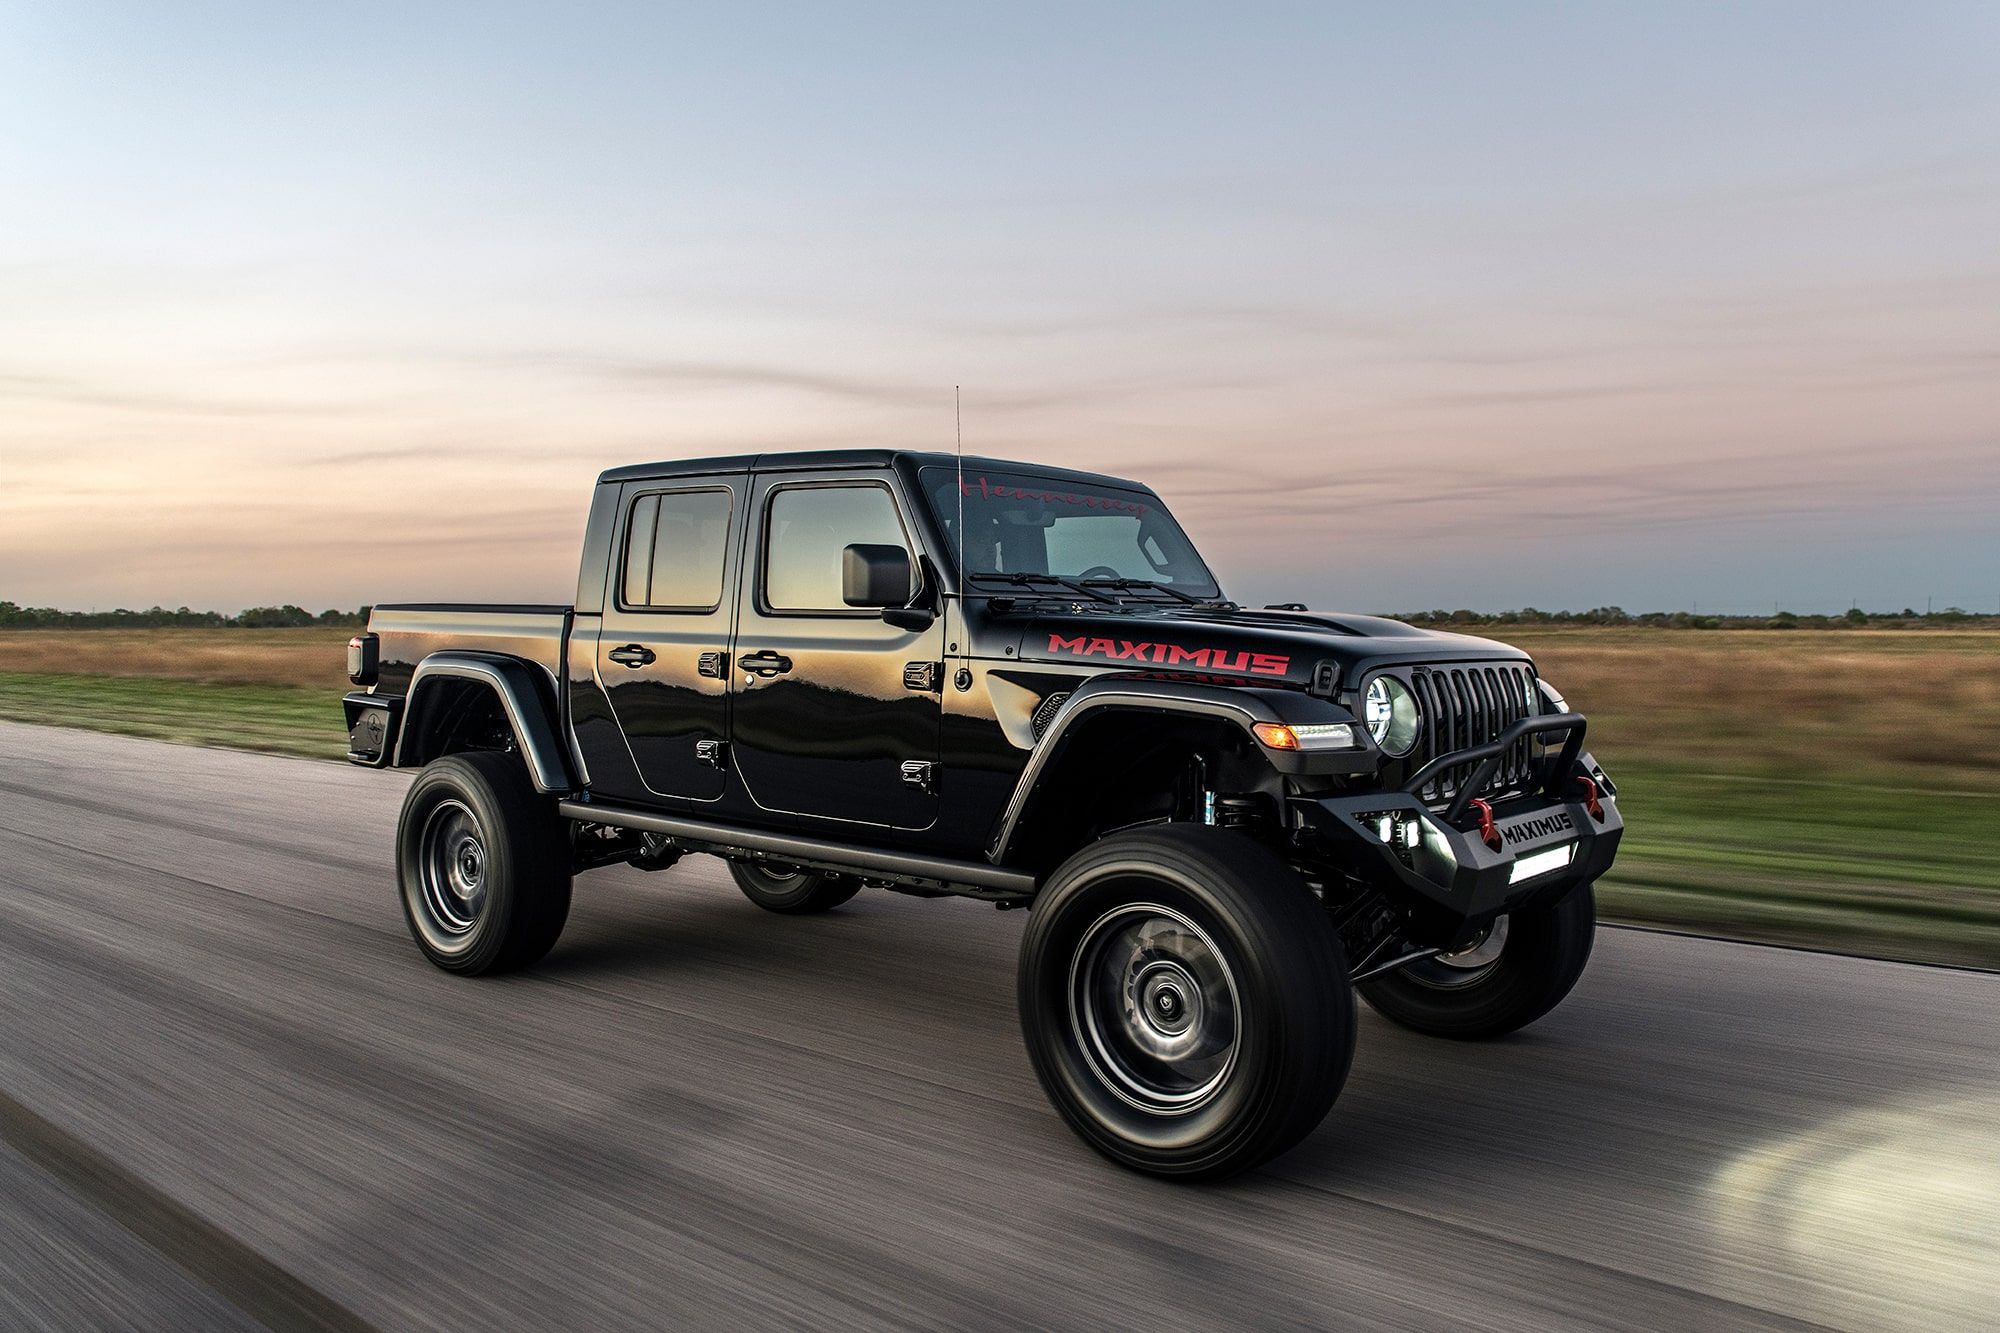 Hennessey Maximus Is a 1000-HP Jeep Gladiator from Hell